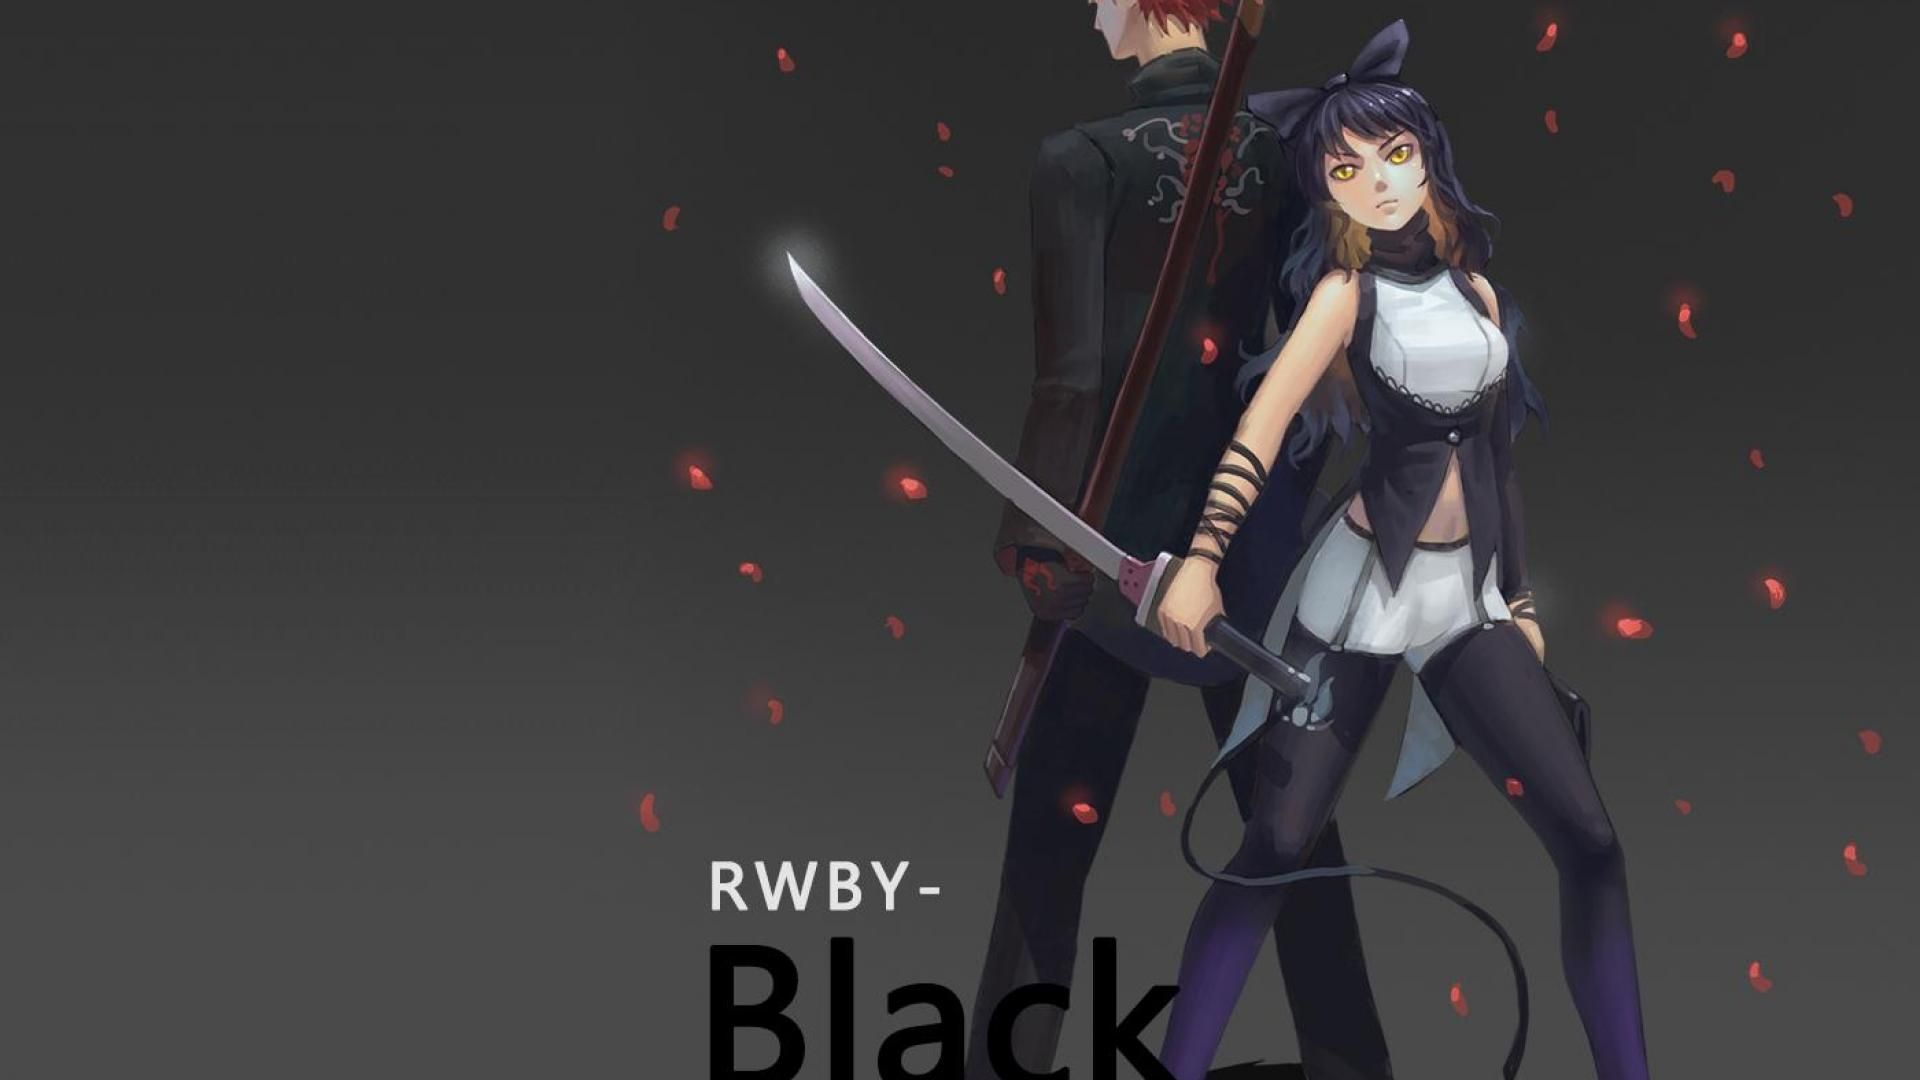 Free download Rwby black 165062 High Quality and Resolution